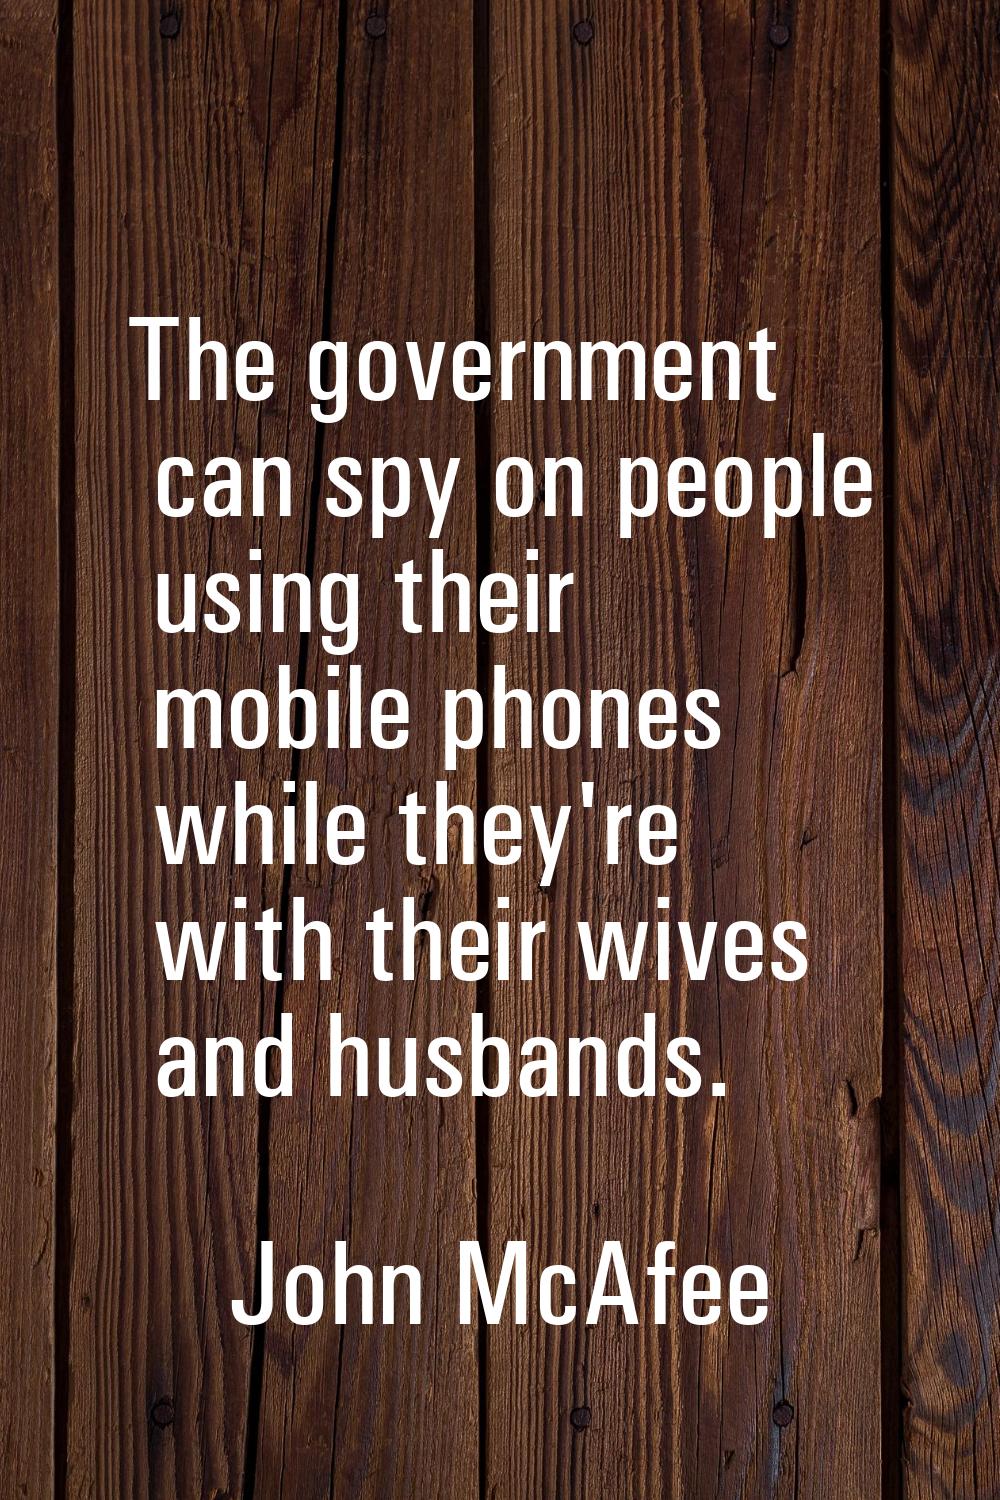 The government can spy on people using their mobile phones while they're with their wives and husba